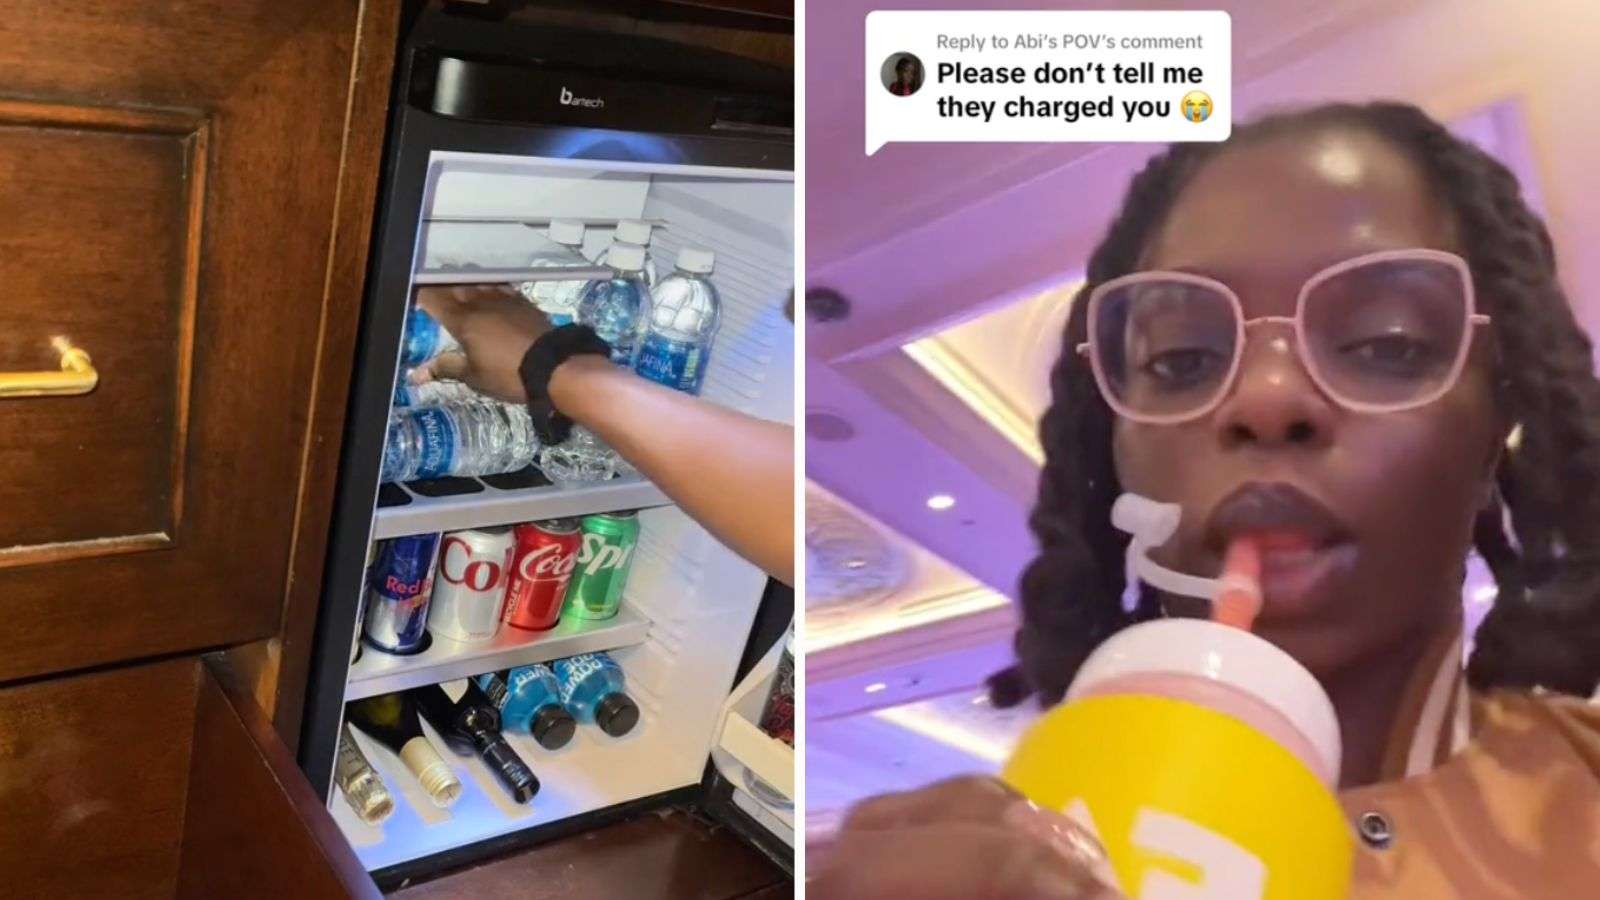 Hotel guest charged $175 for putting own items in mini fridge